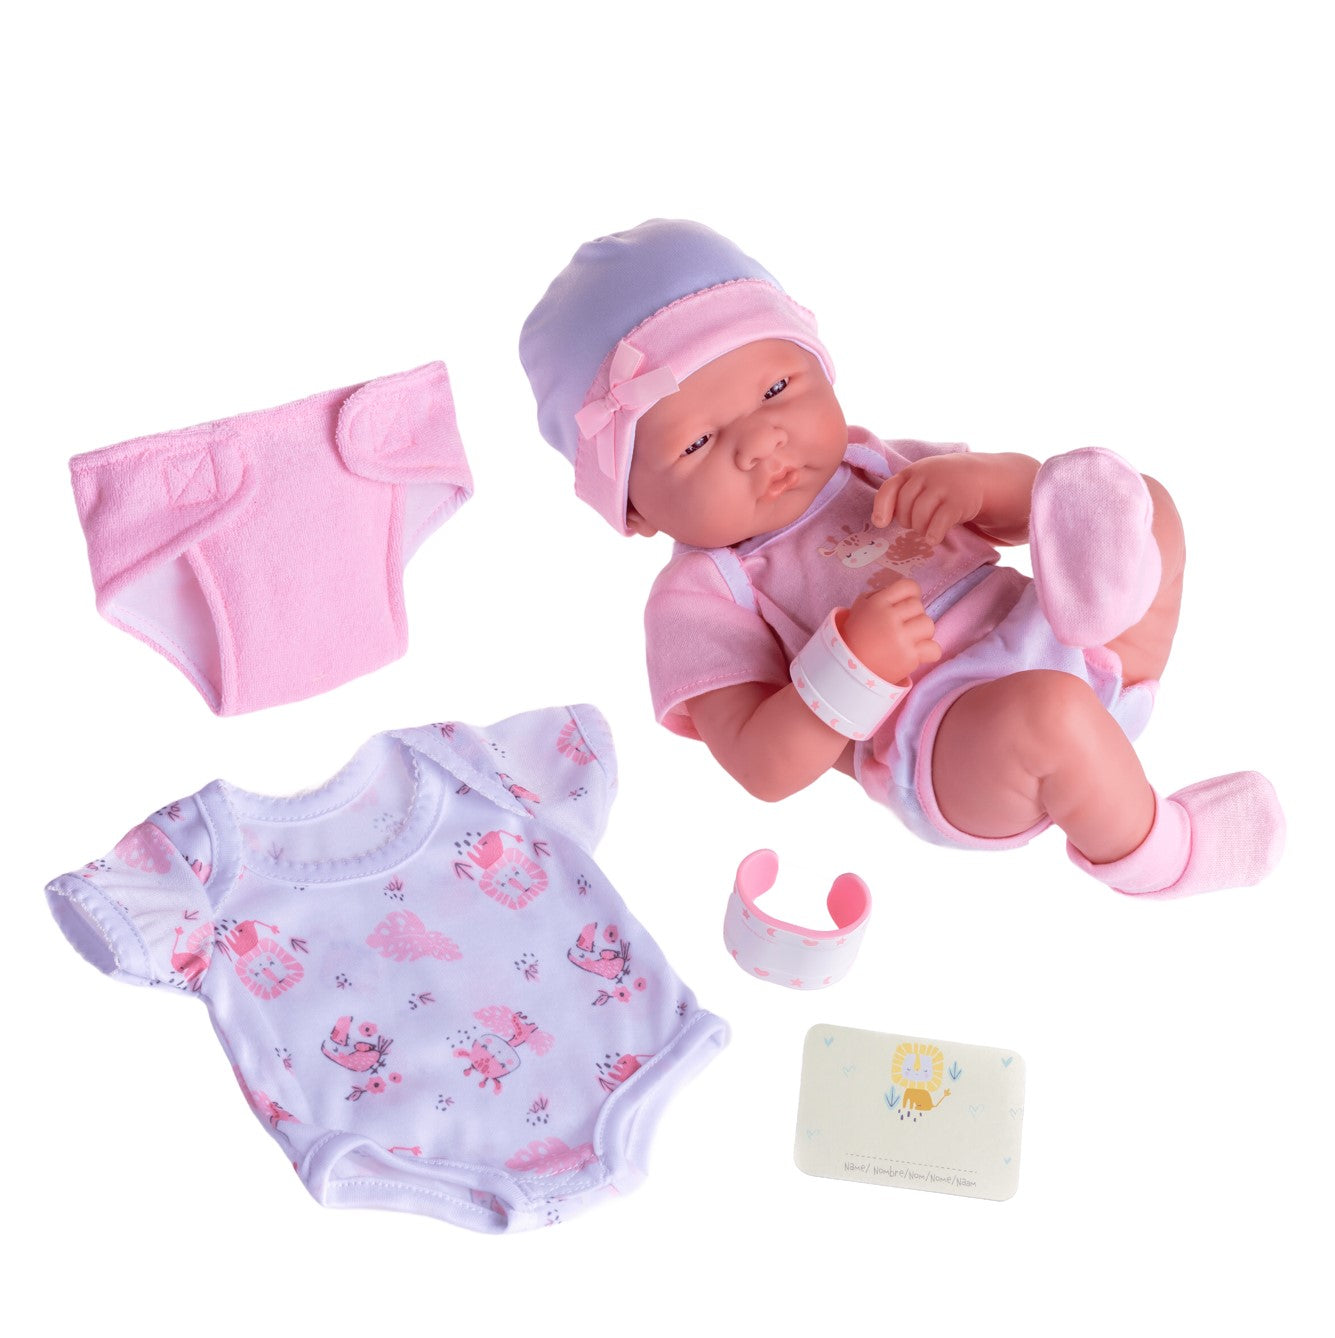 Latest Collection Of Pretty Reborn Baby Dolls For Kids 